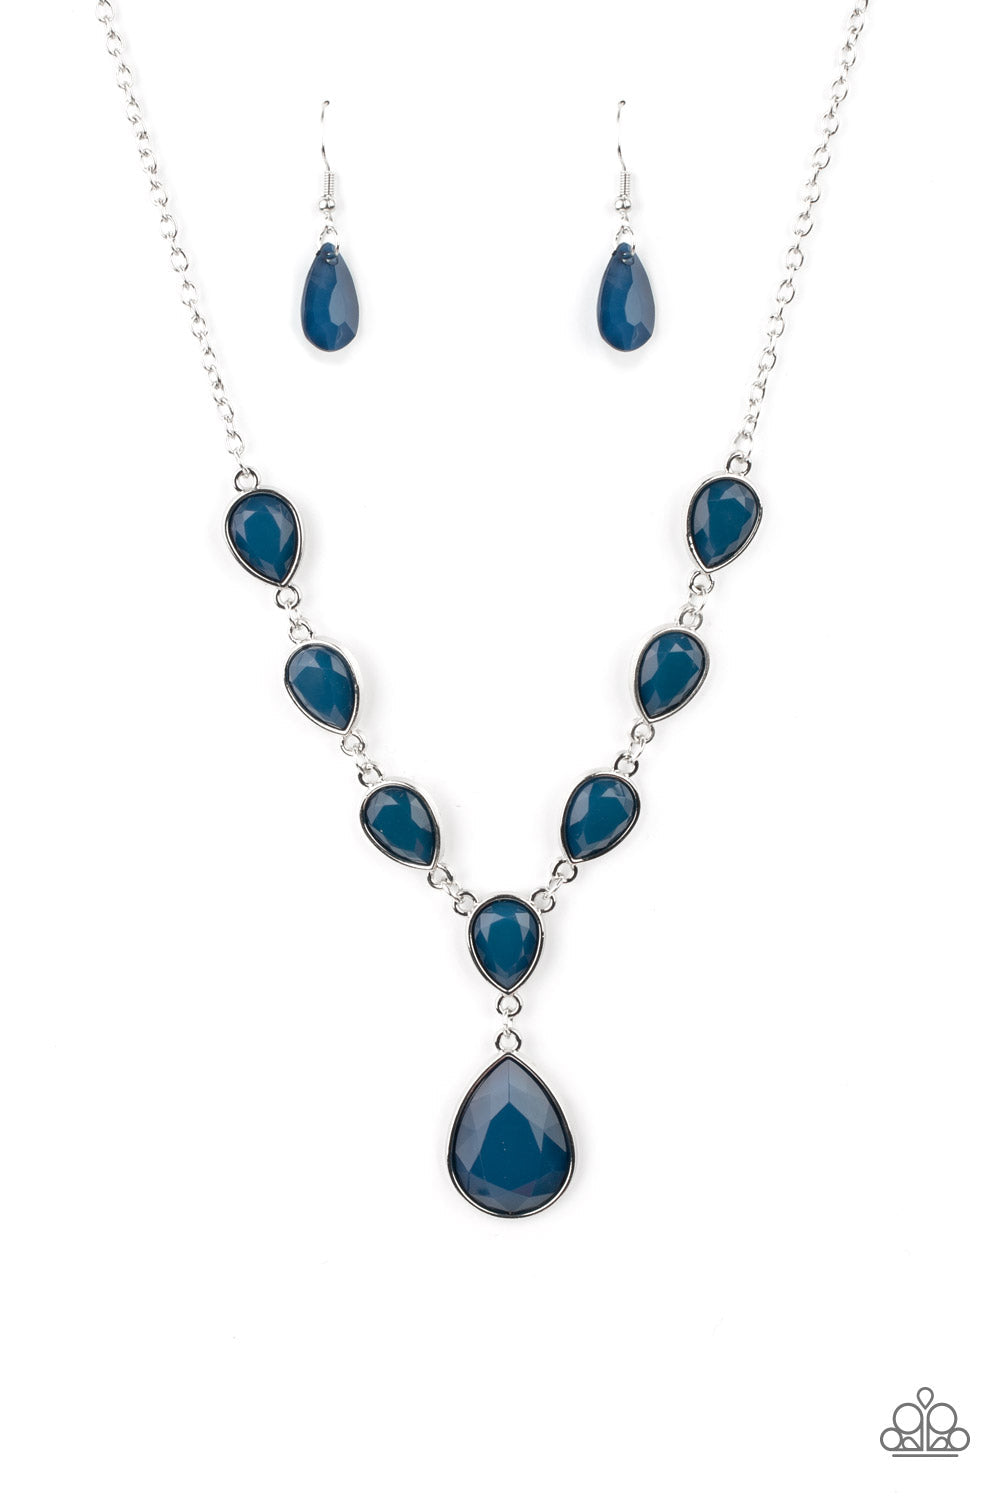 Party Paradise - Blue and Silver Fashion Necklace - Paparazzi Accessories - A silver chain of blue teardrops gives way to an oversized blue teardrop pendant for an enchanting pop of color below the collar. Features an adjustable clasp closure.